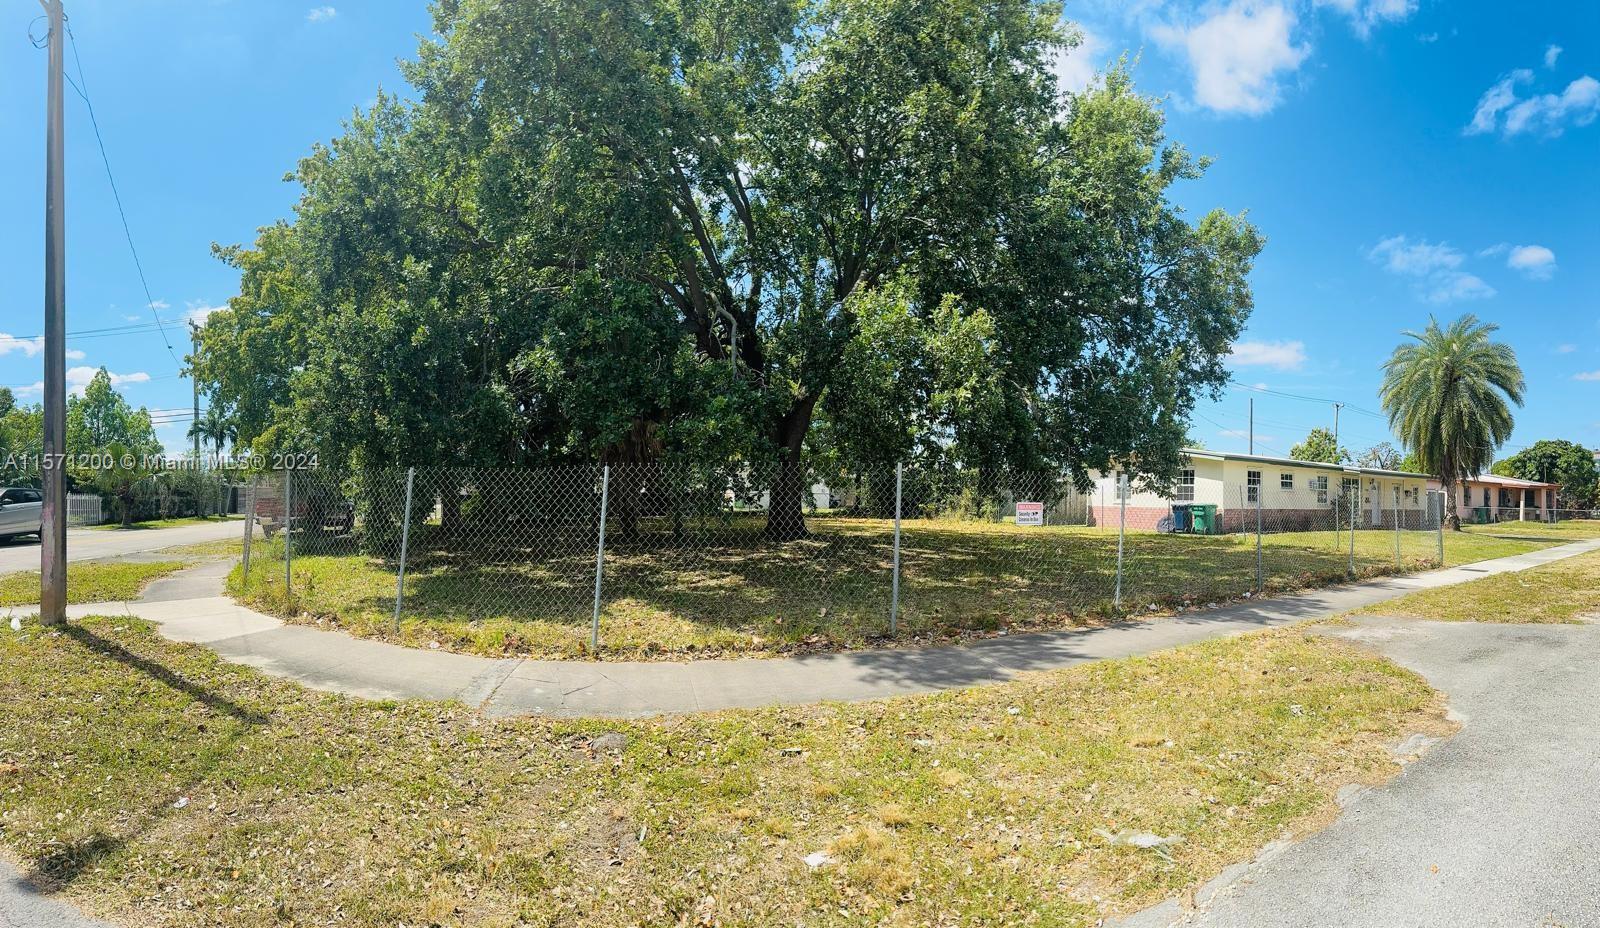 11450 SW 40th St, Miami, Florida 33165, ,Land,For Sale,11450 SW 40th St,A11571200